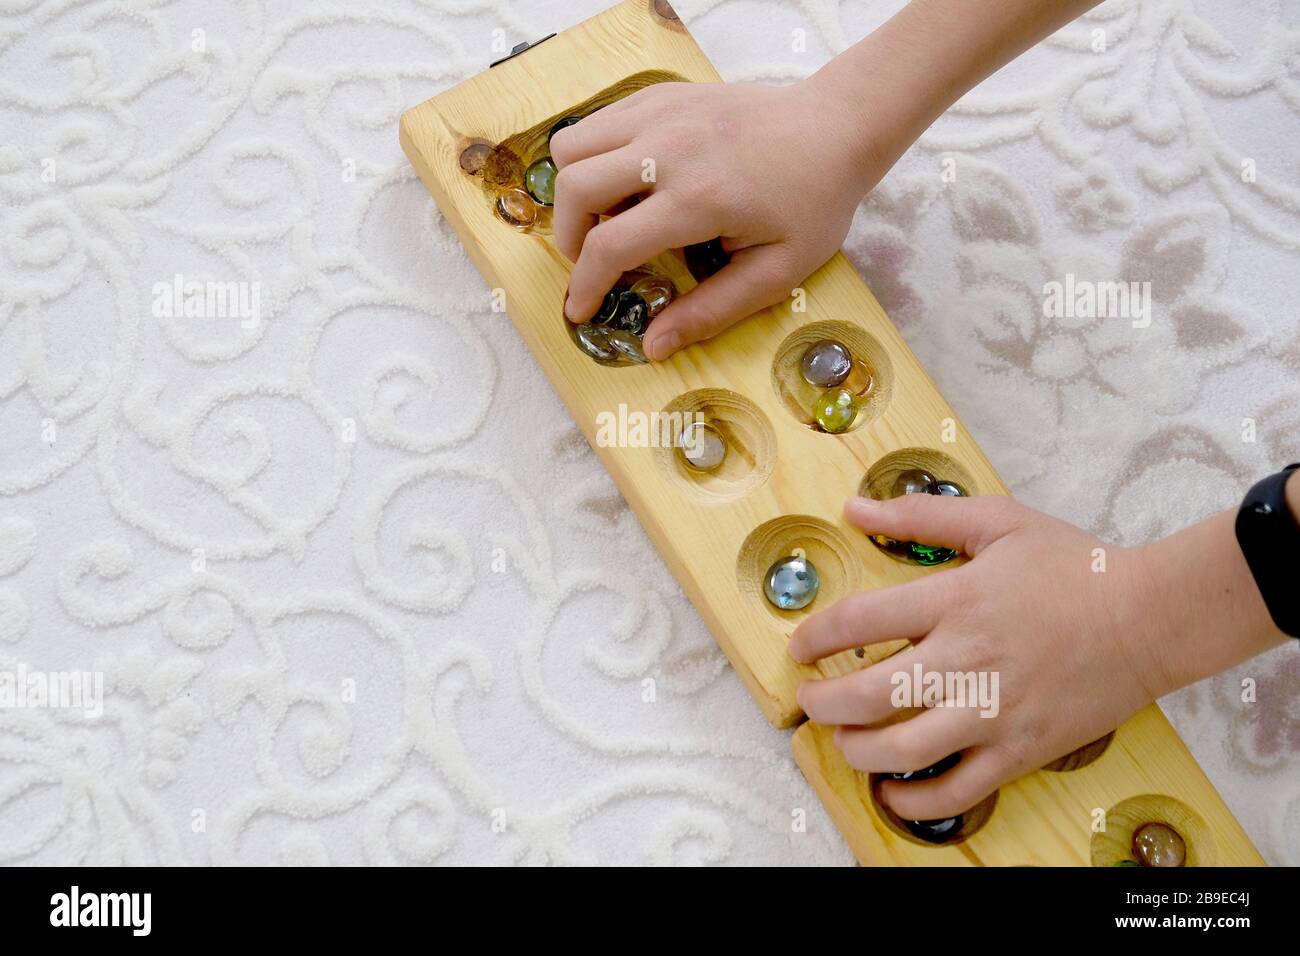 old intelligence games, wooden mancala game, a person playing mancala,play mancala, intelligence game mancala, middle east intelligence game mancala, Stock Photo